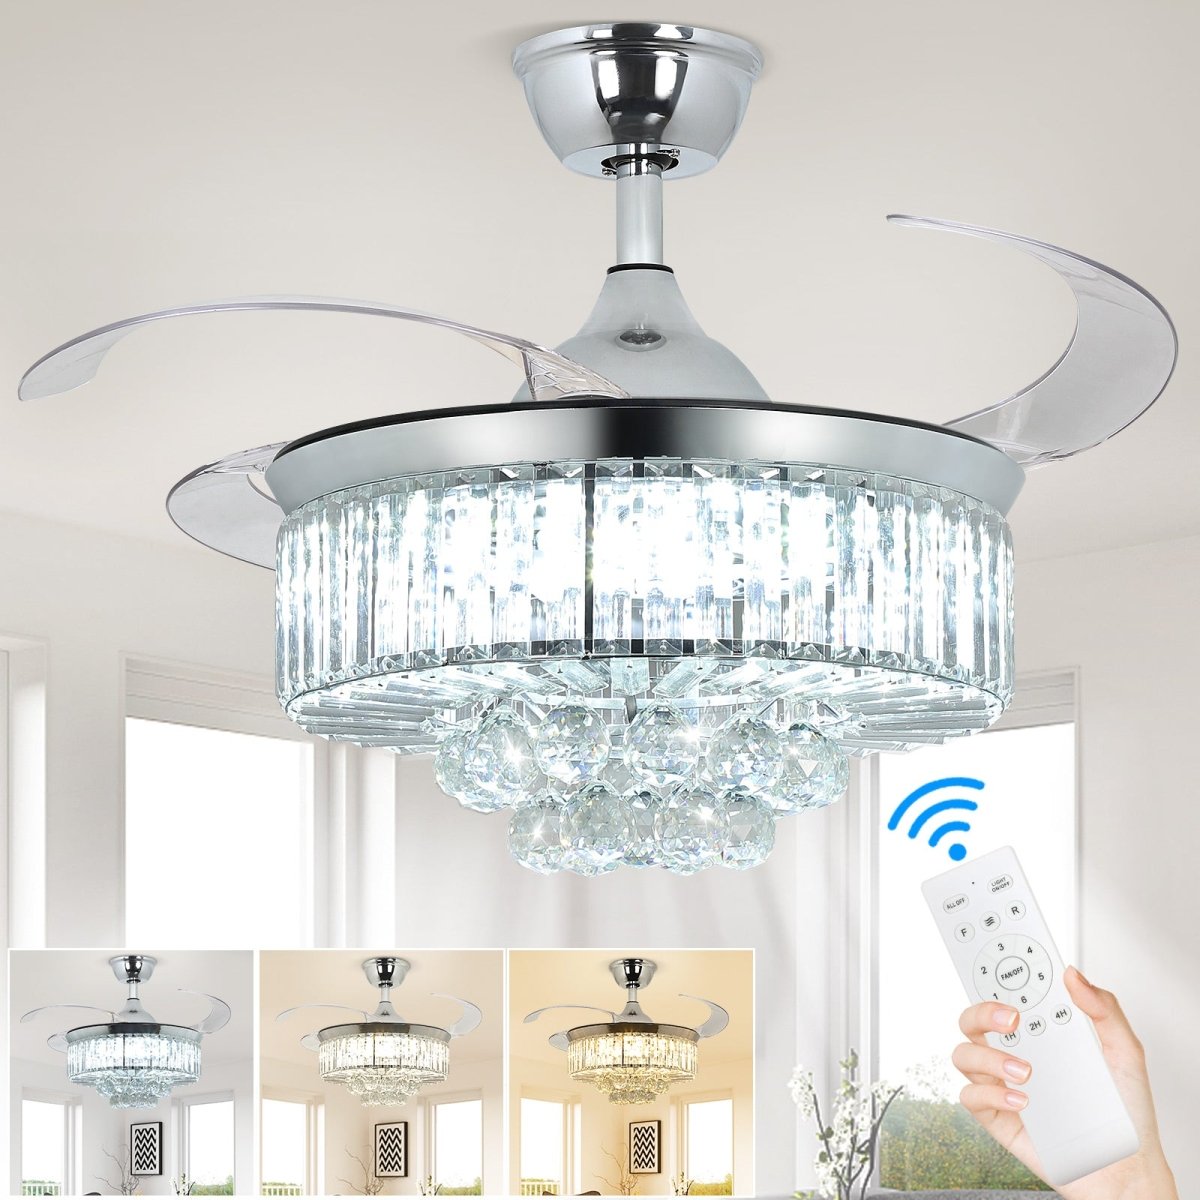 DLLT 42 In Modern Crystal Retractable Invisible Blades Fandelier, LED Chandelier Ceiling Fan with Lights and Remote for Bedroom, Living Room, 3 Color Changeable 3000K-6000K, Reversible DC Motor, 6 Speed, Silver - WS-FPZ39-36C 3 | DEPULEY